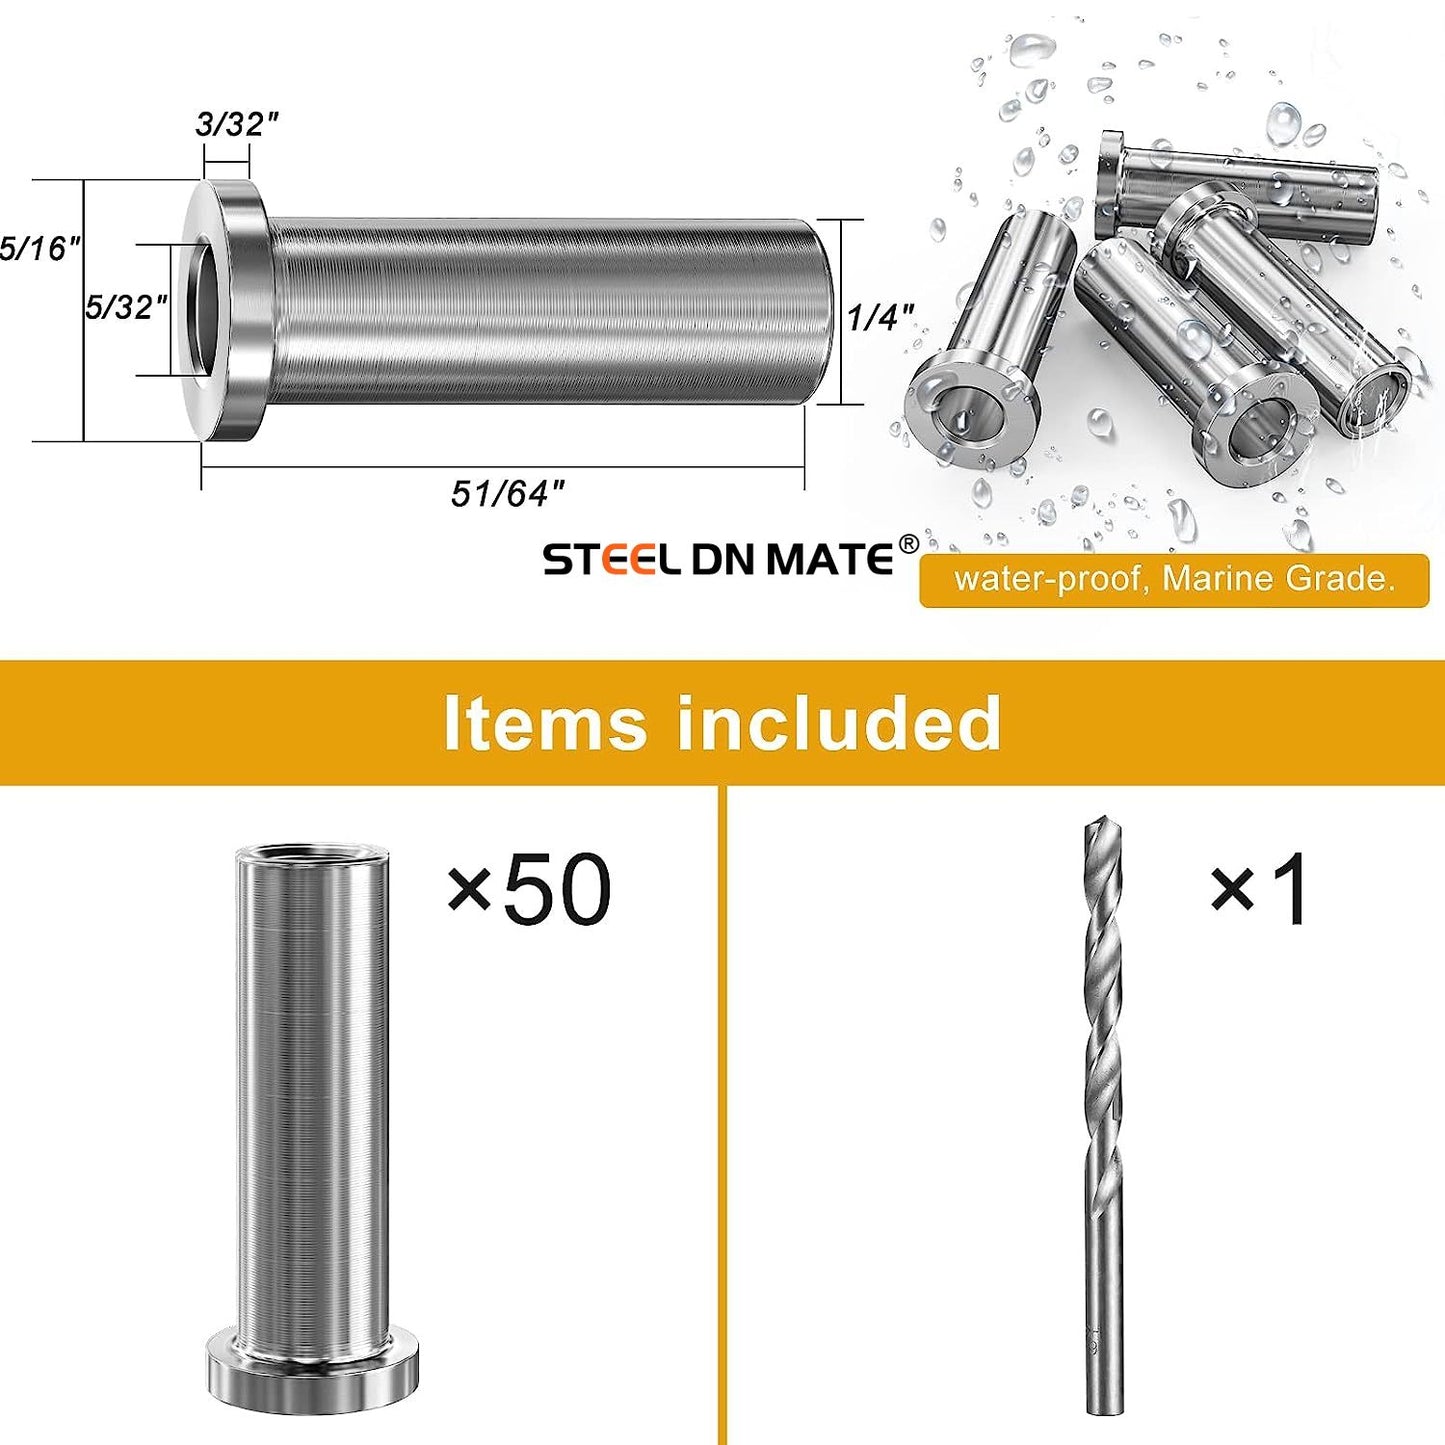 Steel DN Mate 50 Packs Stainless Steel Protector Sleeves for 1/8" Deck Cable Railing, for Wood/Composite Posts, T316 Marine Grade, Cable Railing Protector Sleeves DP05